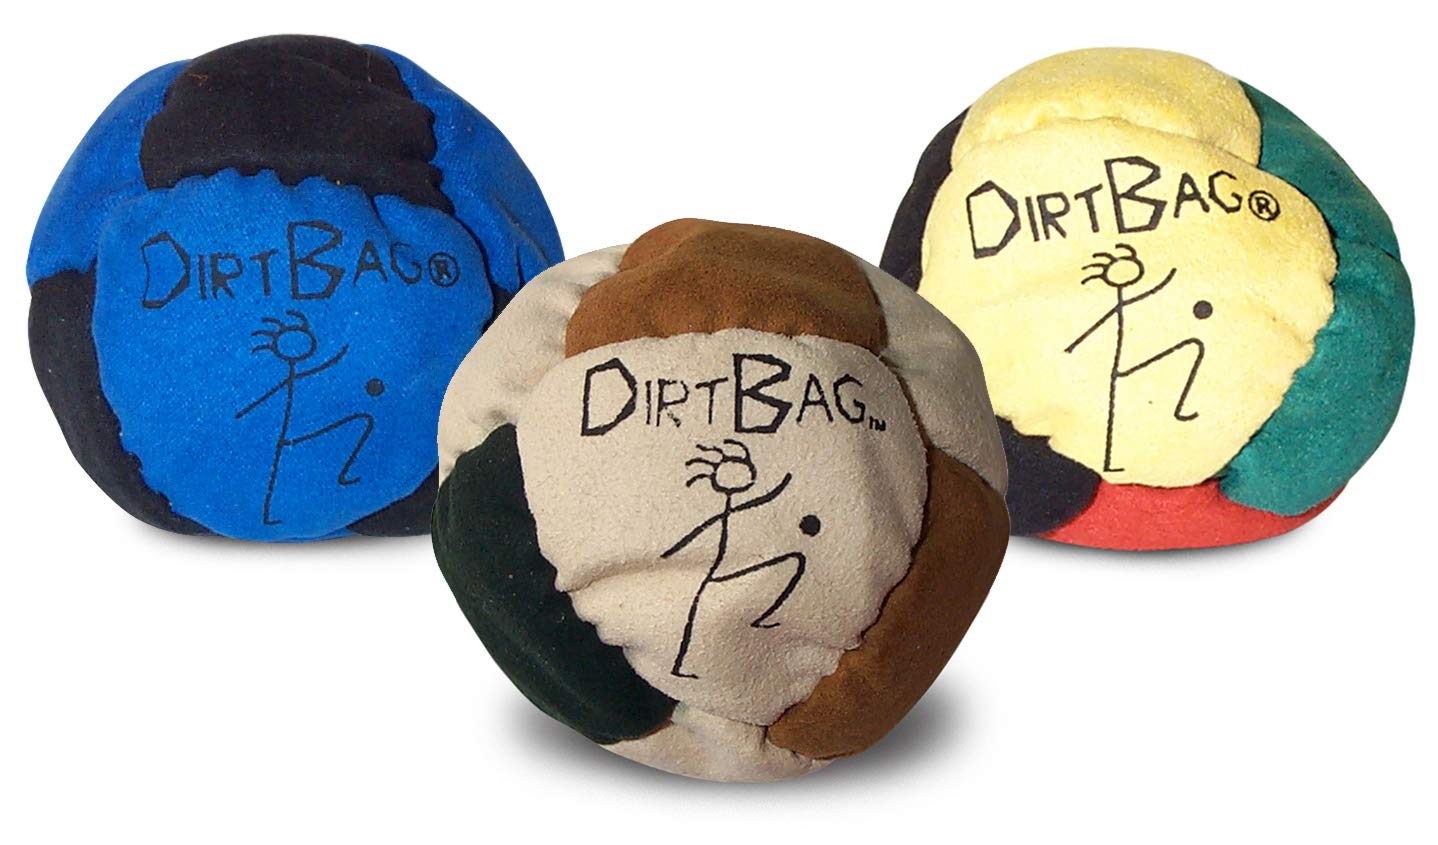 World Footbag Dirtbag Footbag 8-Panel Synthetic Suede and Sand Filled Hacky Sack Footbag | 3-Pack Assorted Color (PN: 8711)